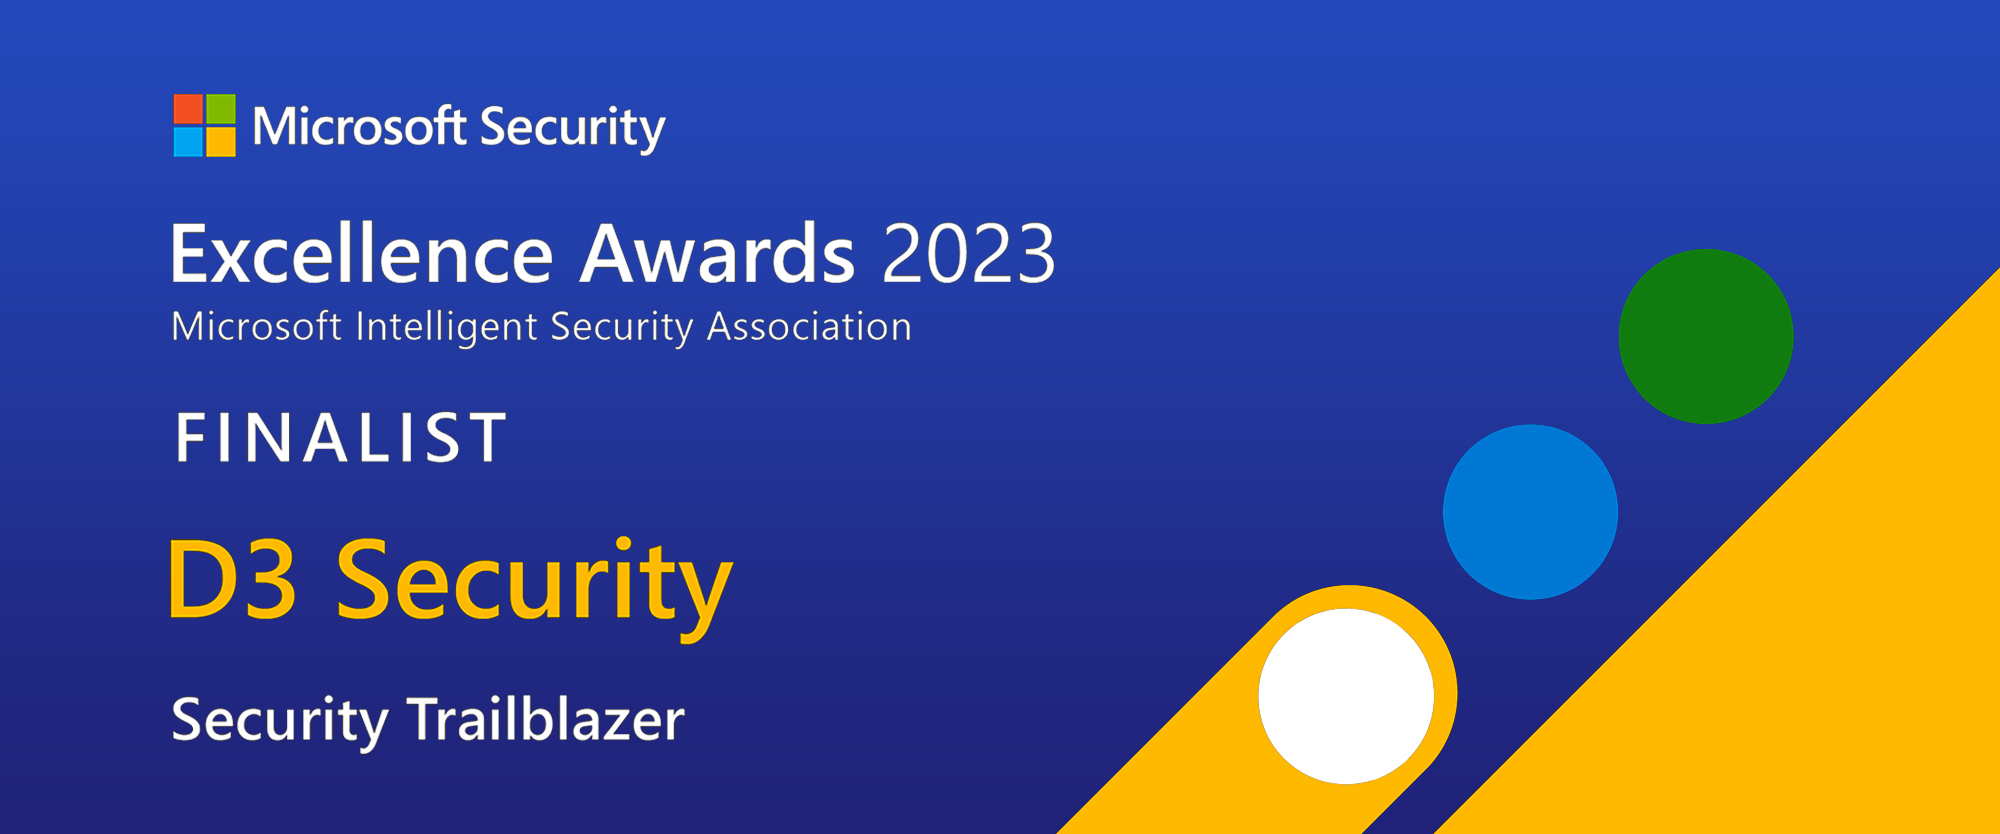 D3 Security Recognized as a Microsoft Security Excellence Awards Finalist for Security Trailblazer